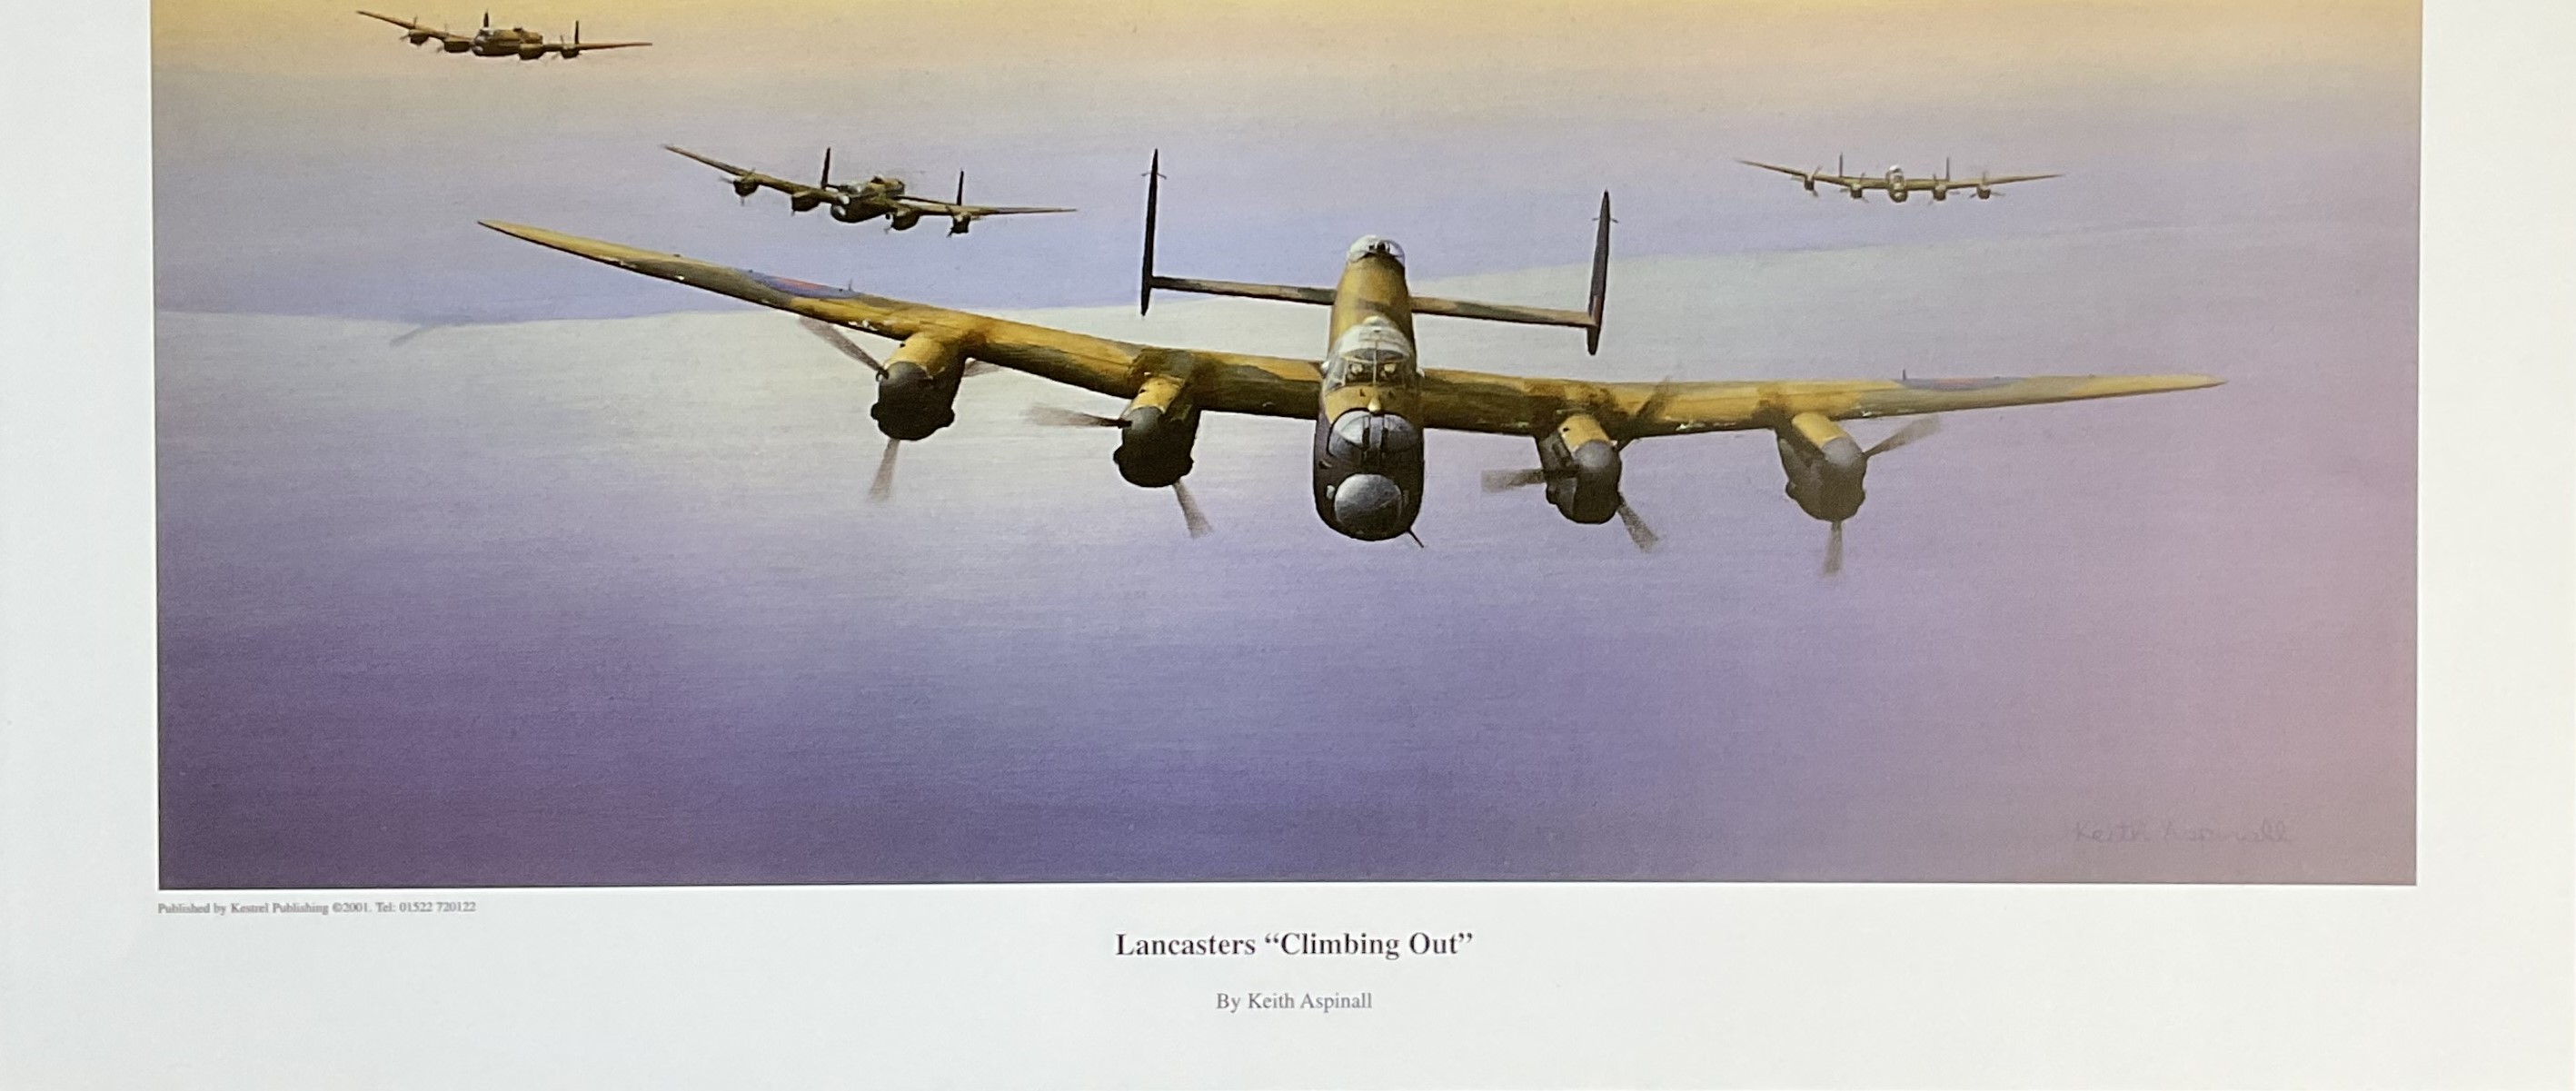 WW2 Colour Print Titled Lancasters Climbing Out by Keith Aspinall. Measures 16x12 inches appx. - Image 5 of 6